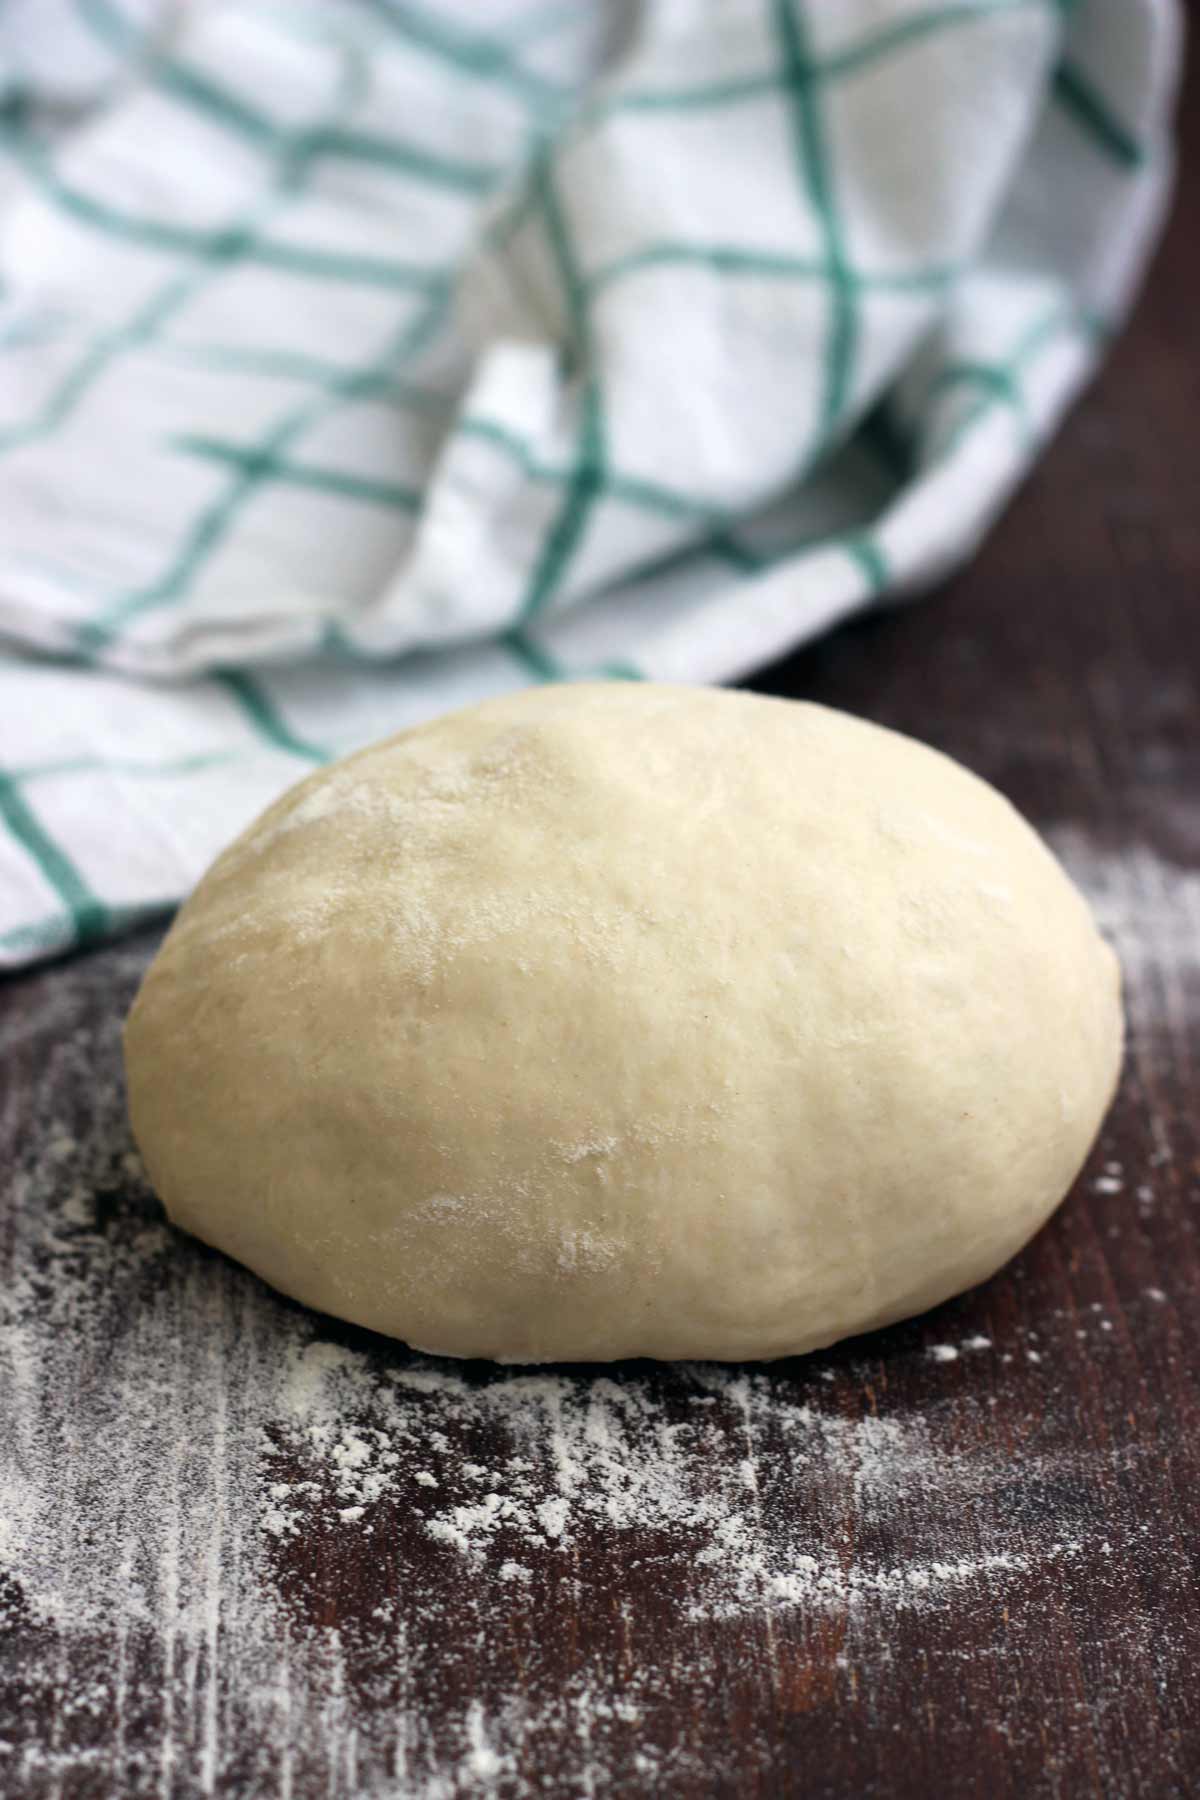 How to Make a Homemade Pizza Crust